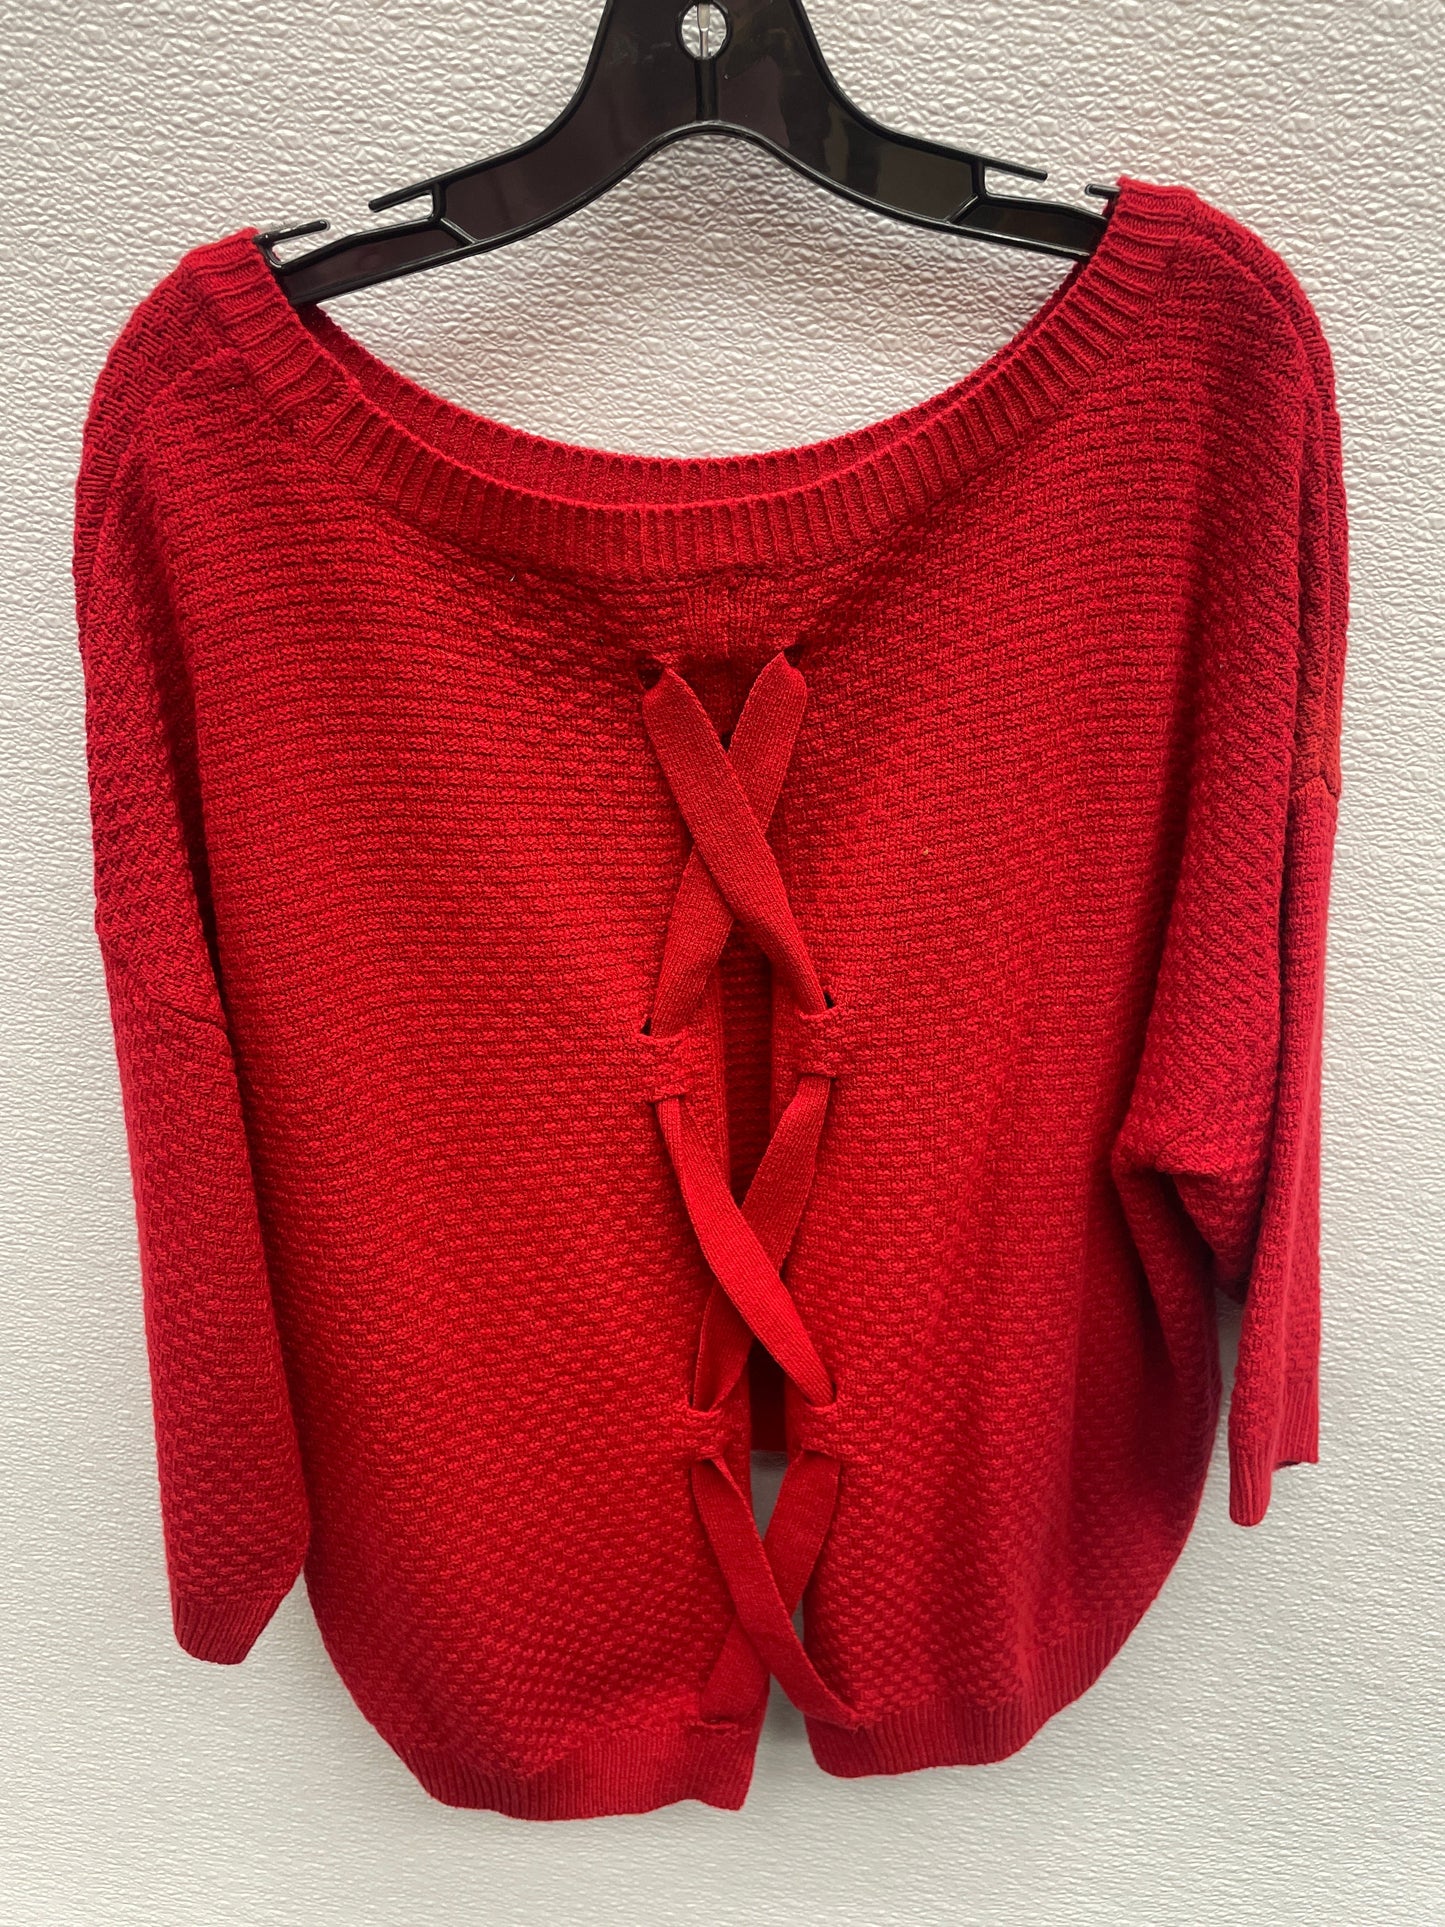 Sweater By Soho Design Group  Size: M